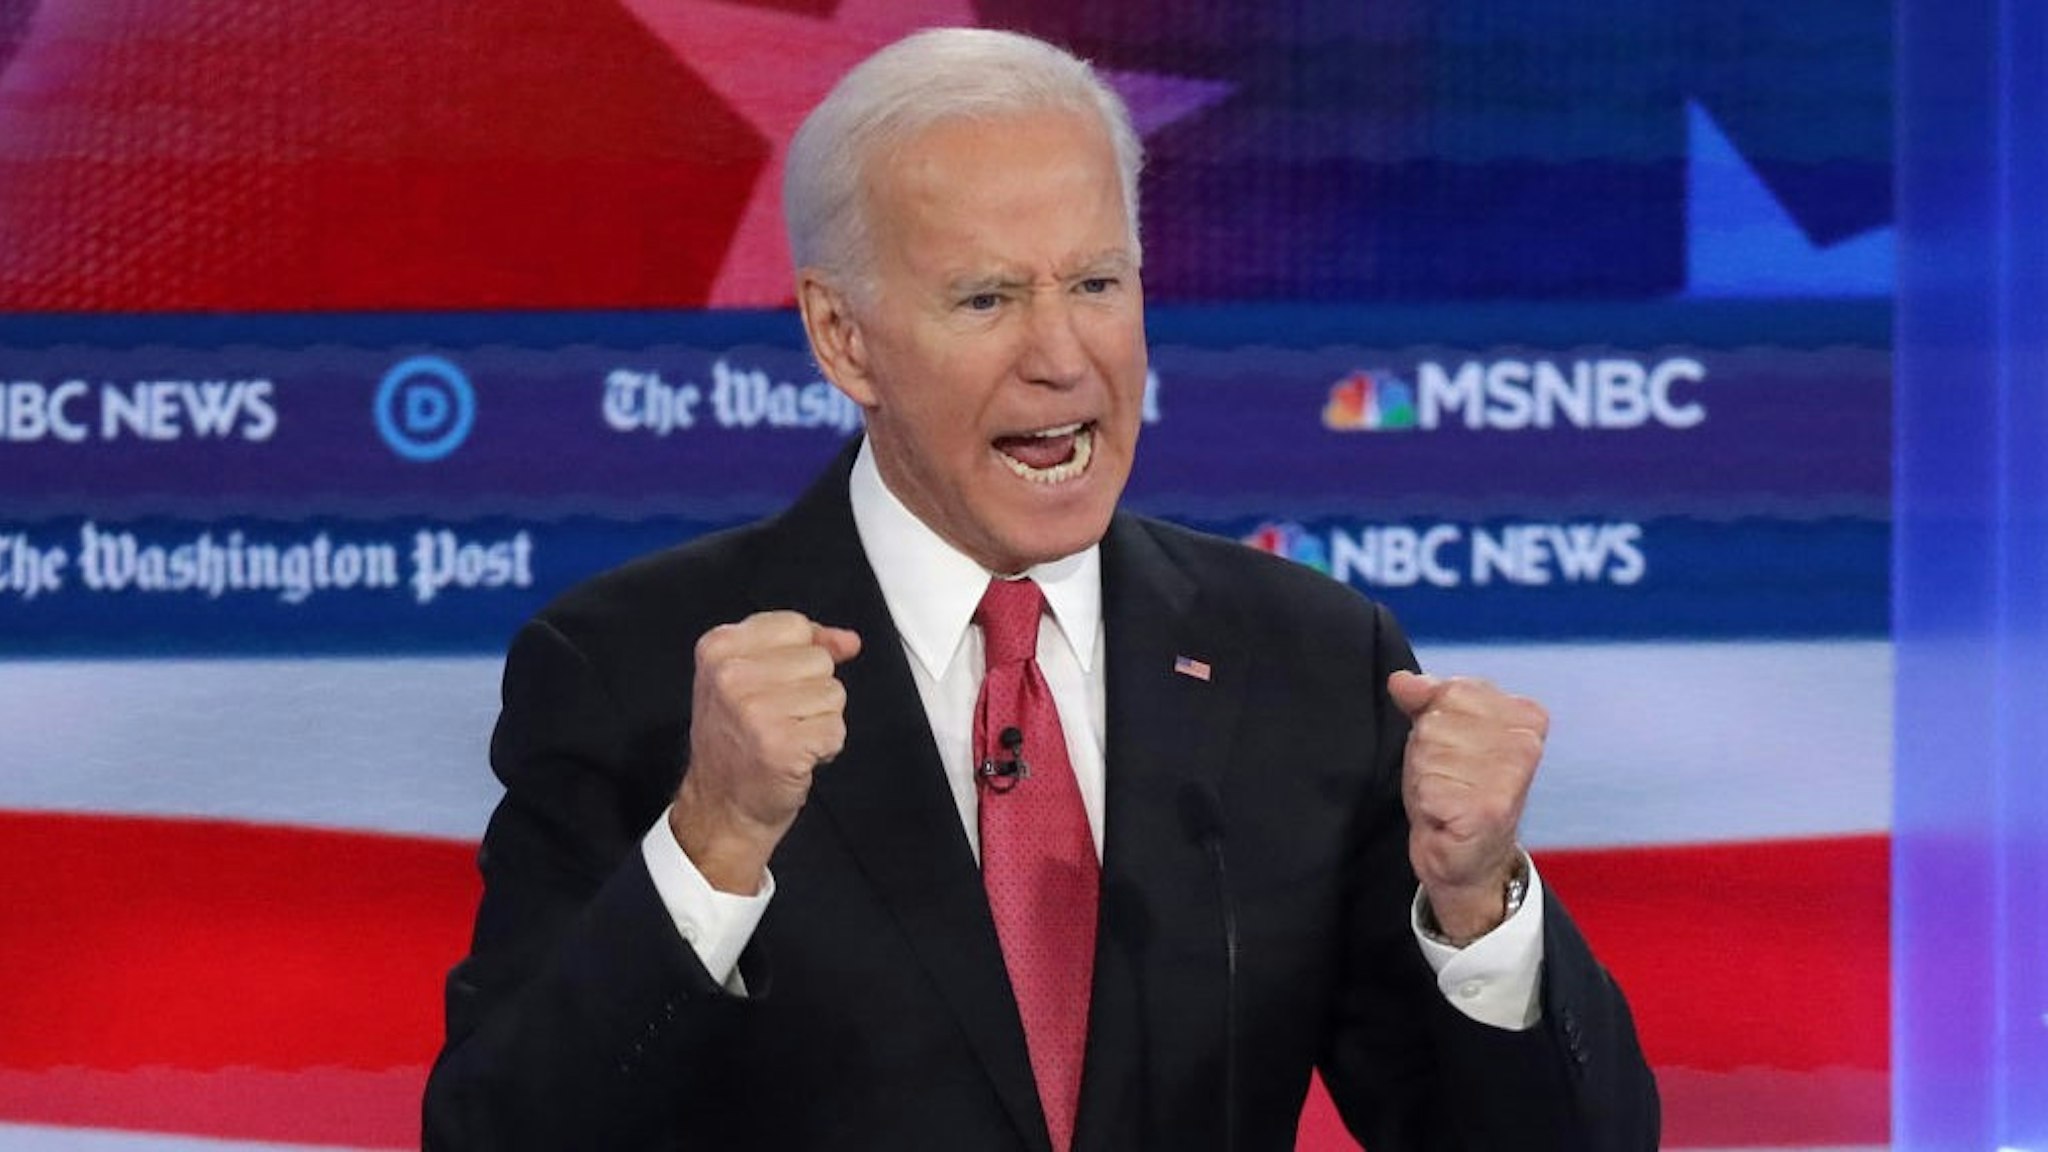 ATLANTA, GEORGIA - NOVEMBER 20: Former Vice President Joe Biden speaks during the Democratic Presidential Debate at Tyler Perry Studios November 20, 2019 in Atlanta, Georgia. Ten Democratic presidential hopefuls were chosen from the larger field of candidates to participate in the debate hosted by MSNBC and The Washington Post. (Photo by